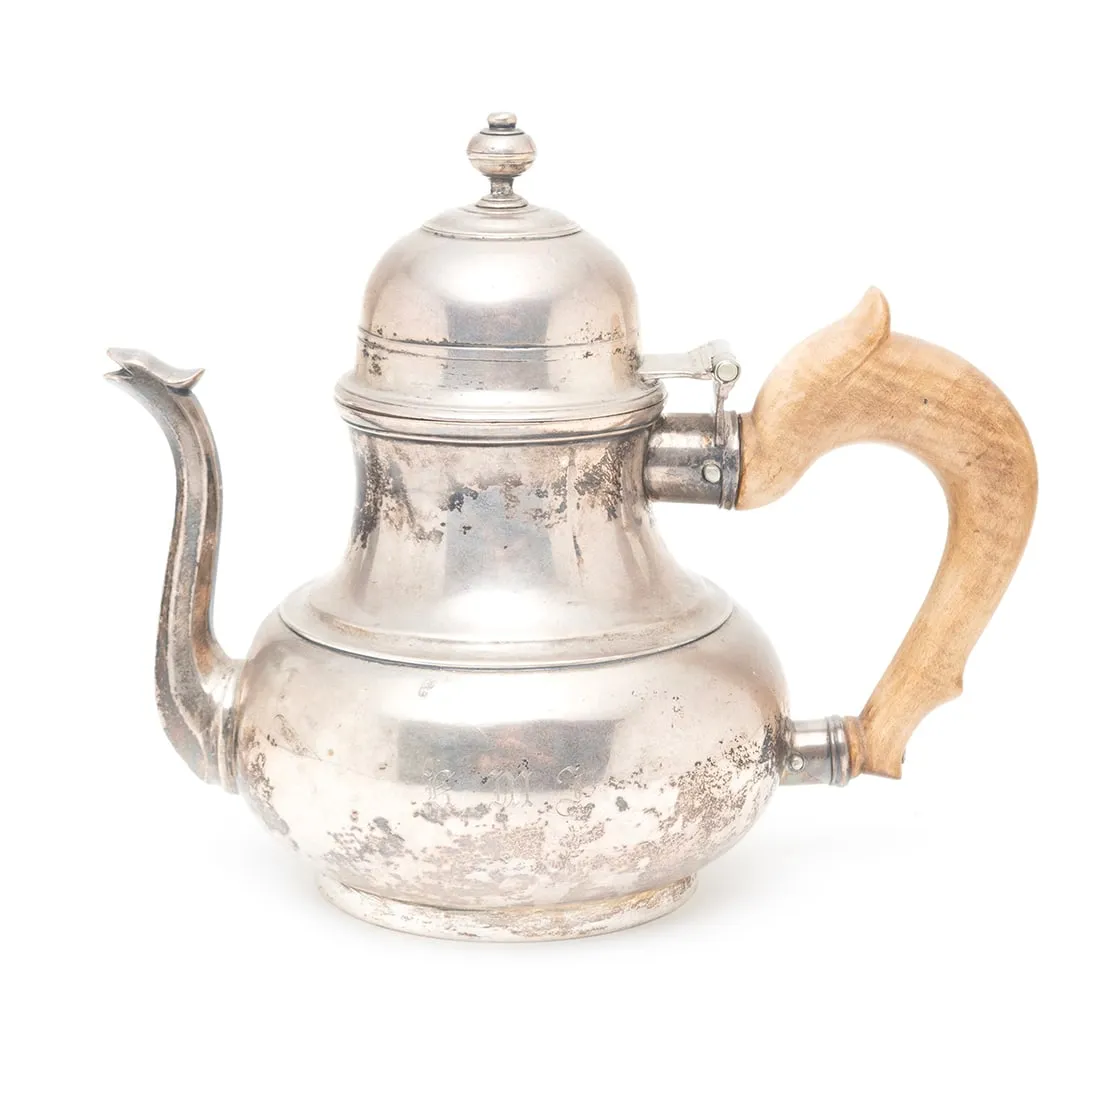 Thauvet Besley-marked sterling silver teapot leads our five lots to watch